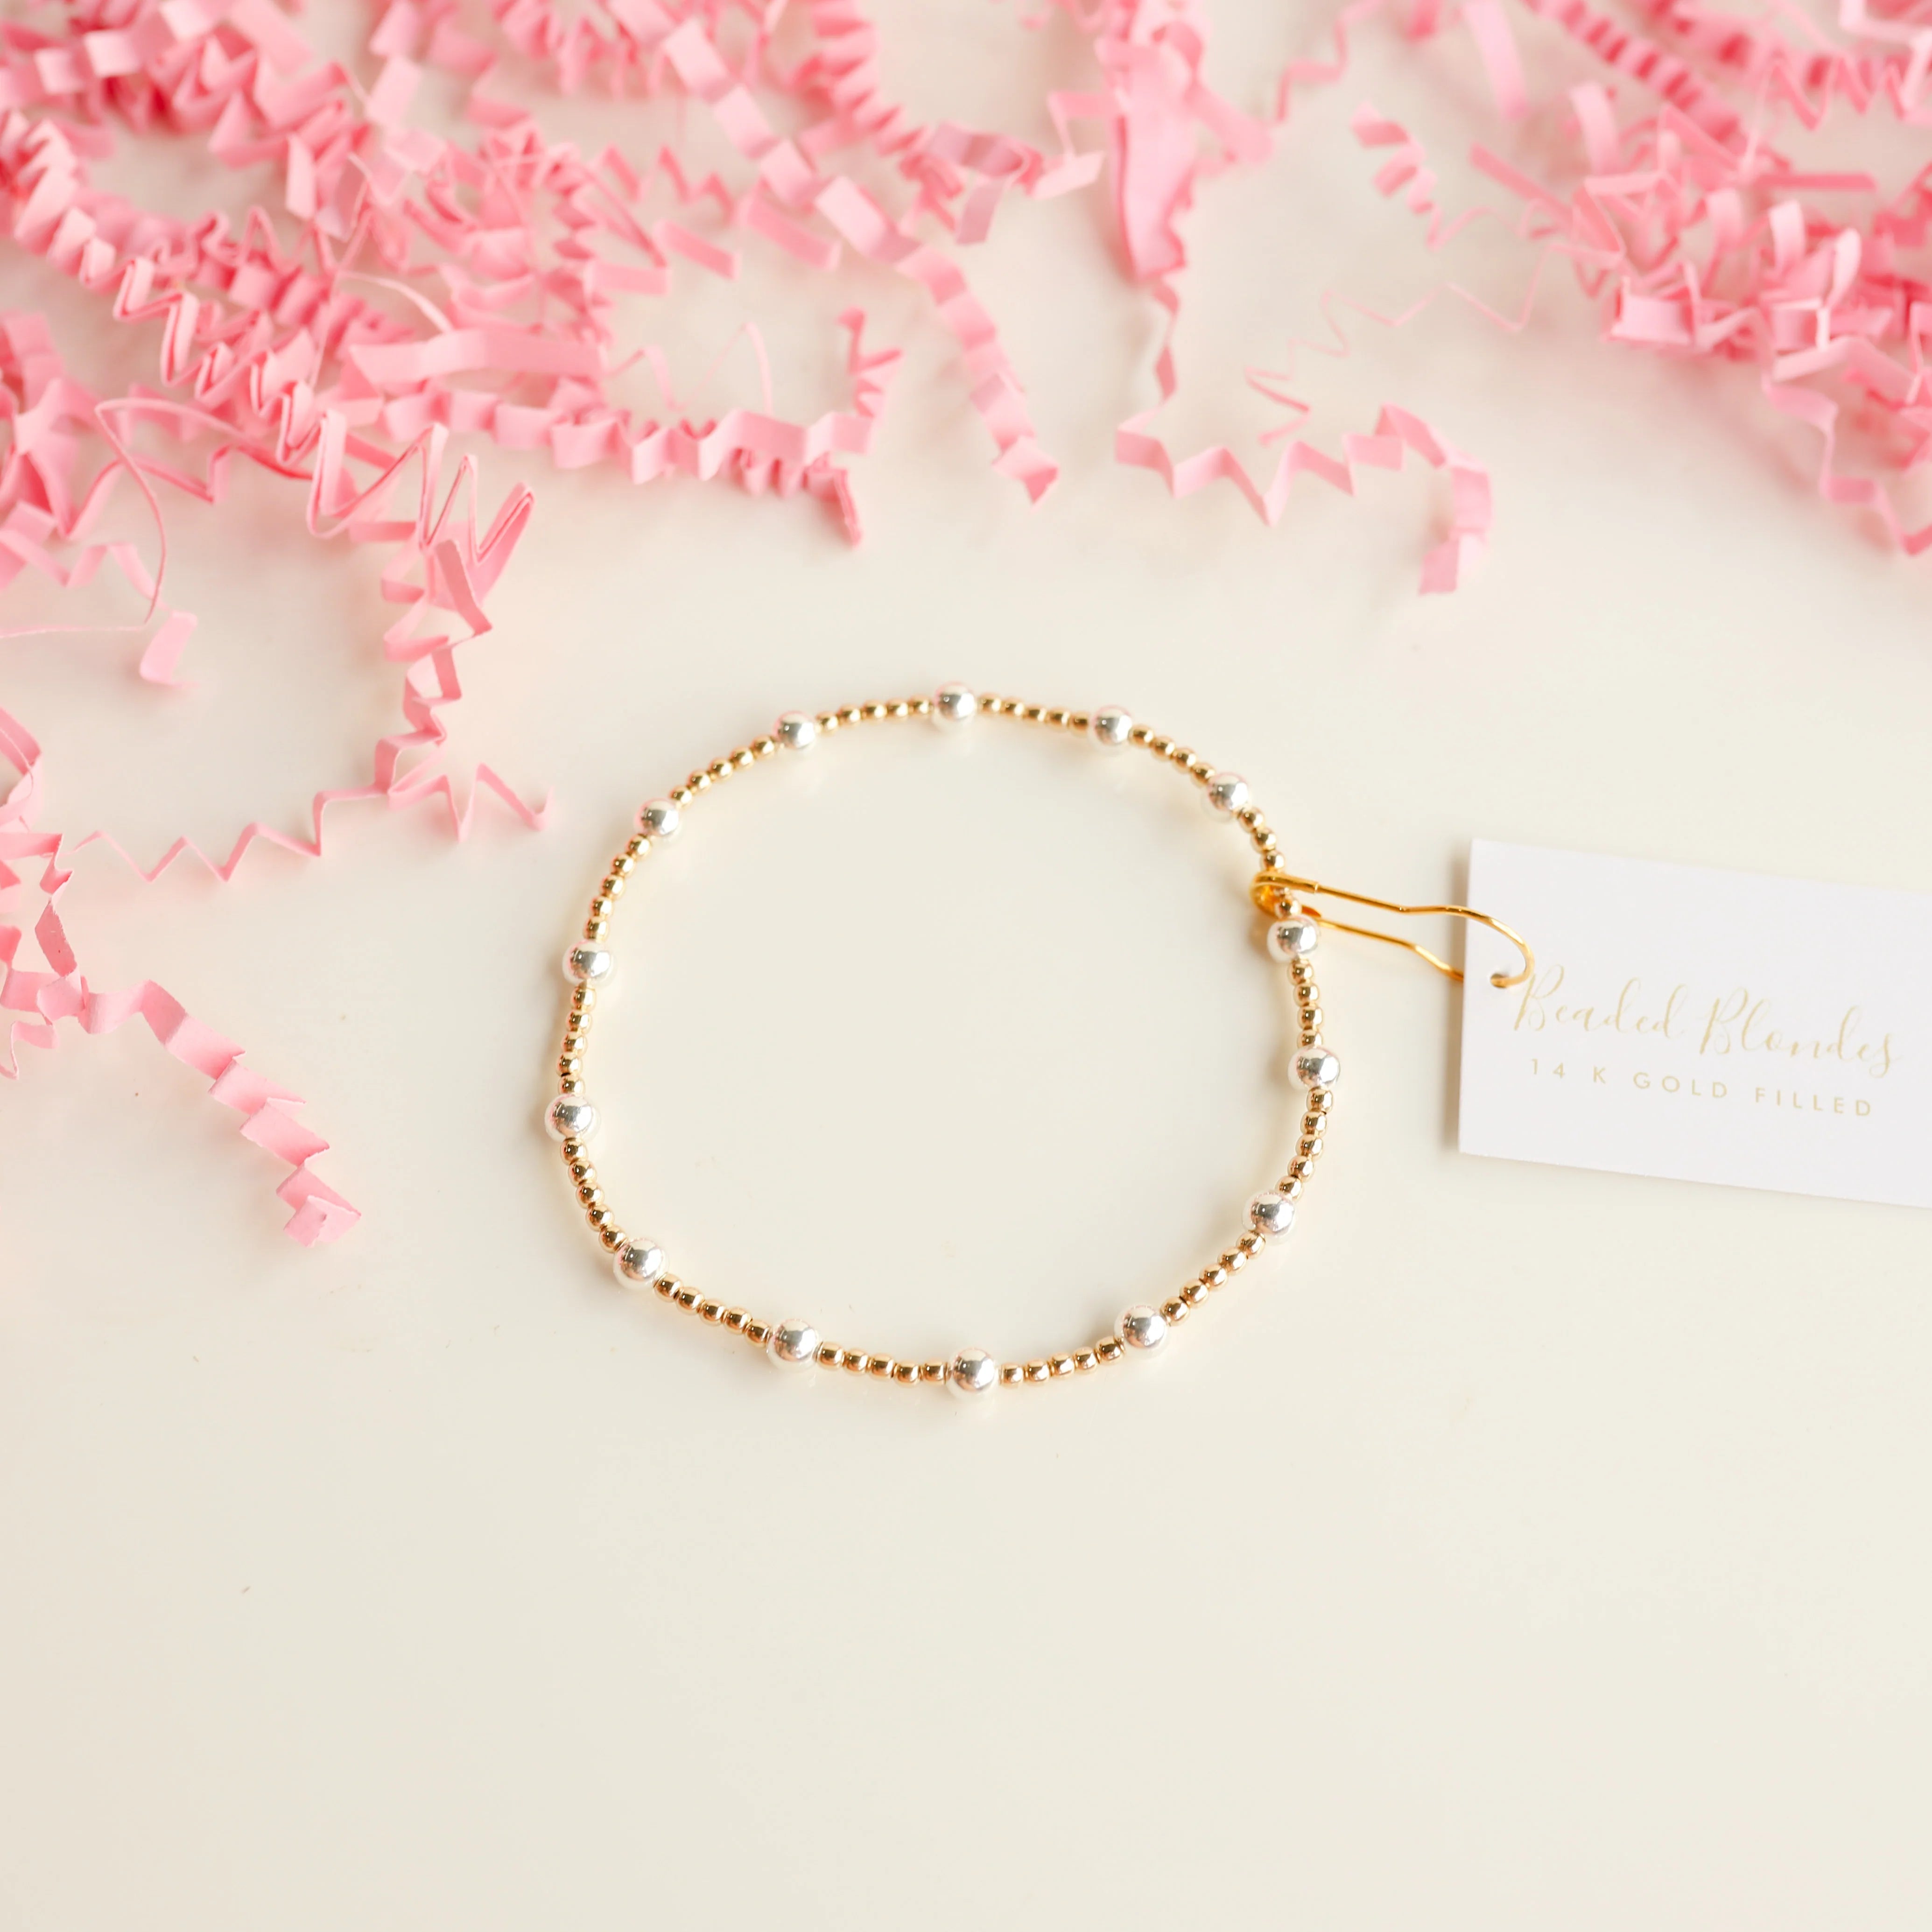 Beaded Blondes | Lively Bracelet in Mixed Metals - Giddy Up Glamour Boutique